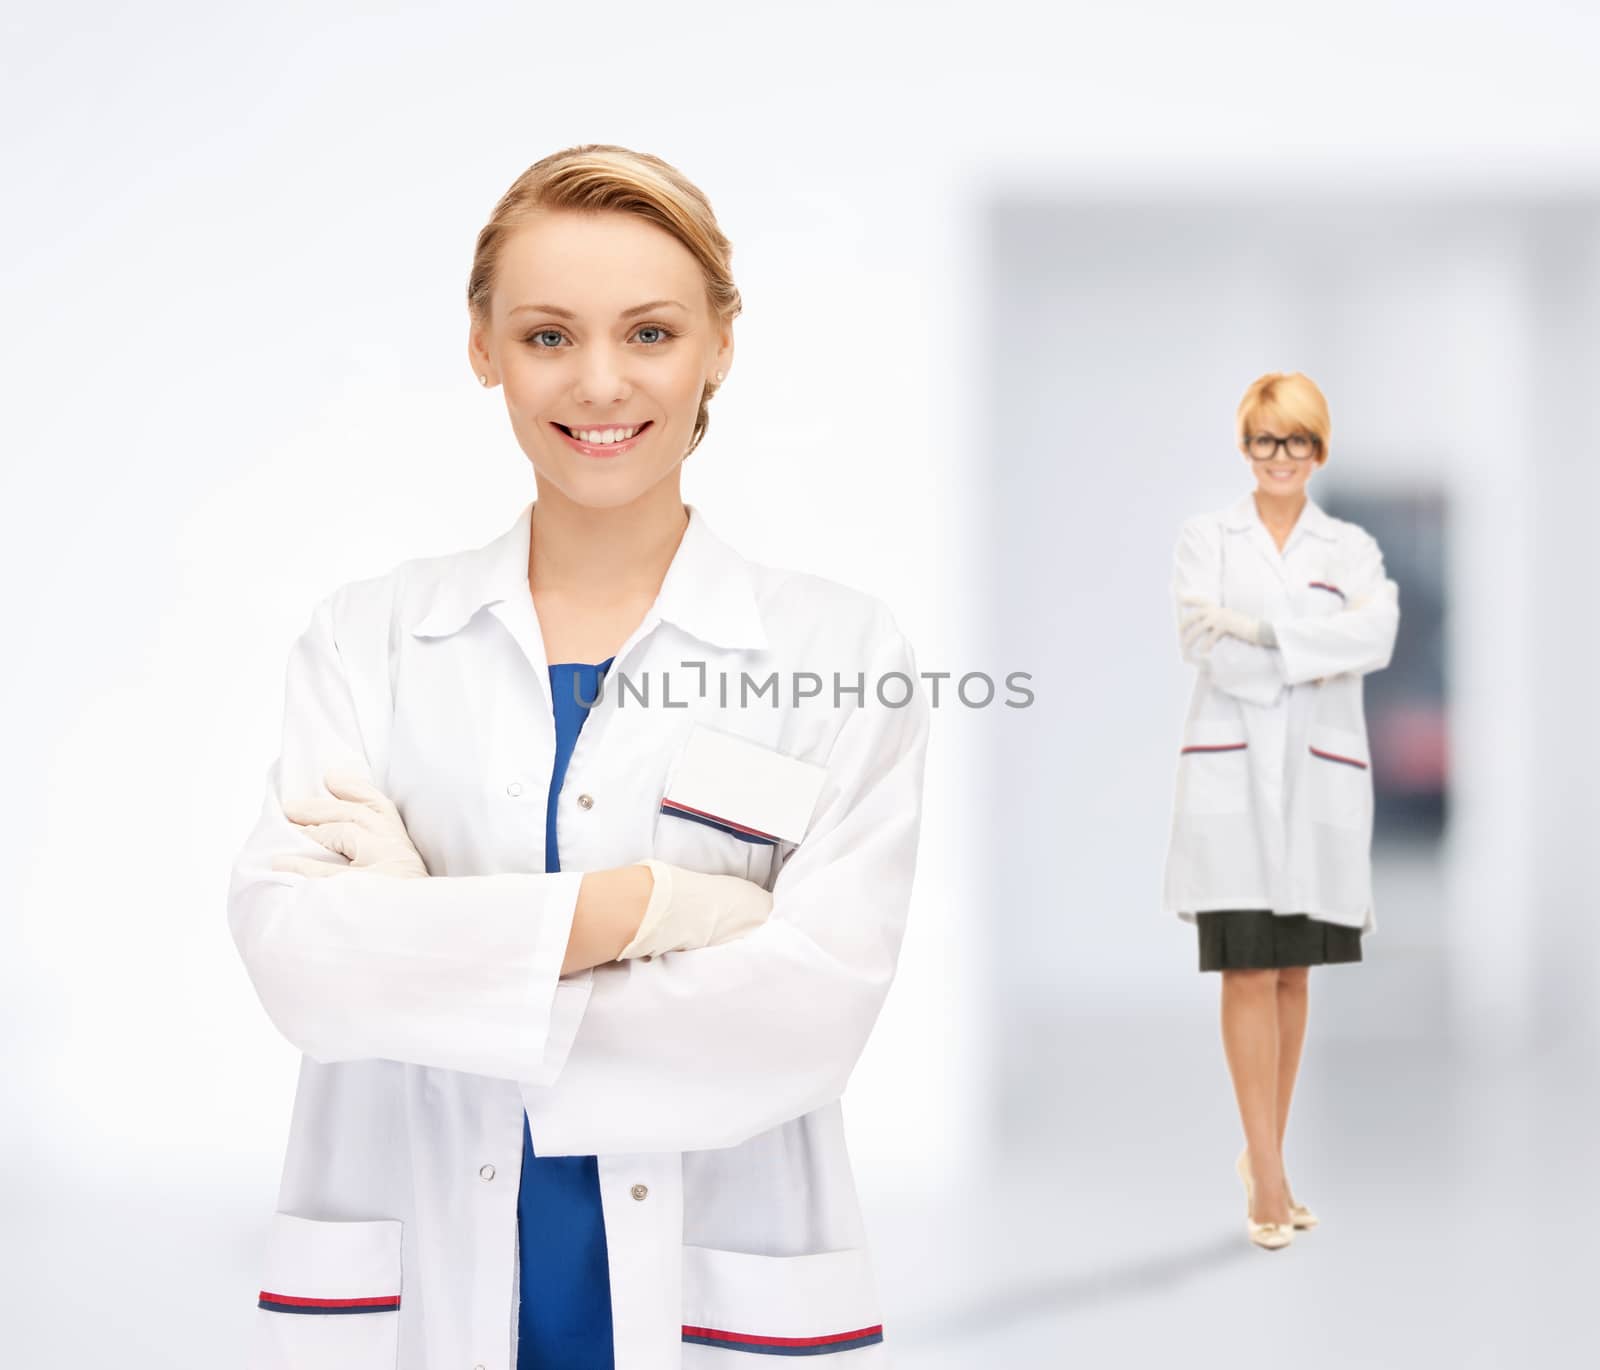 bright picture of two attractive female doctors